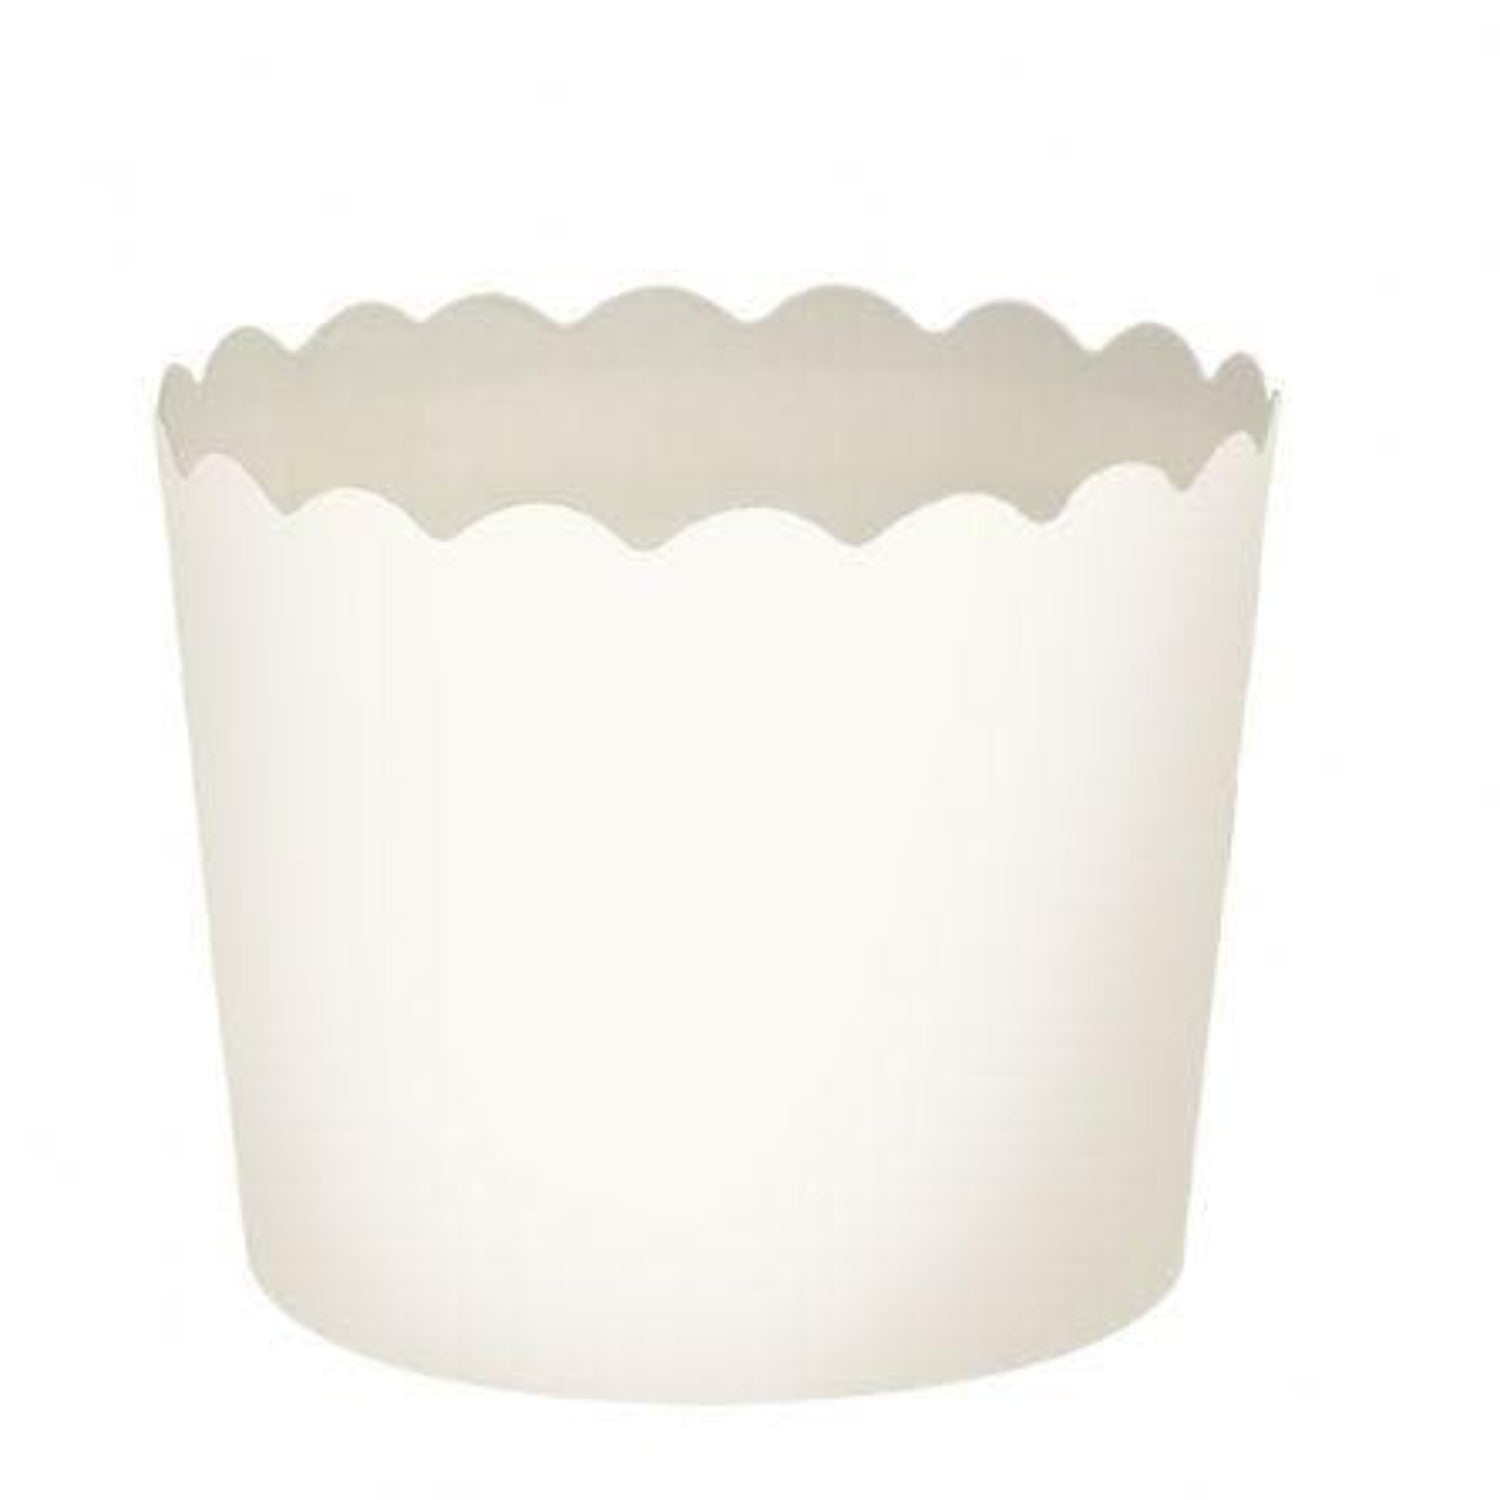 Wilton Jumbo Baking Cup Liner, White 50 Count